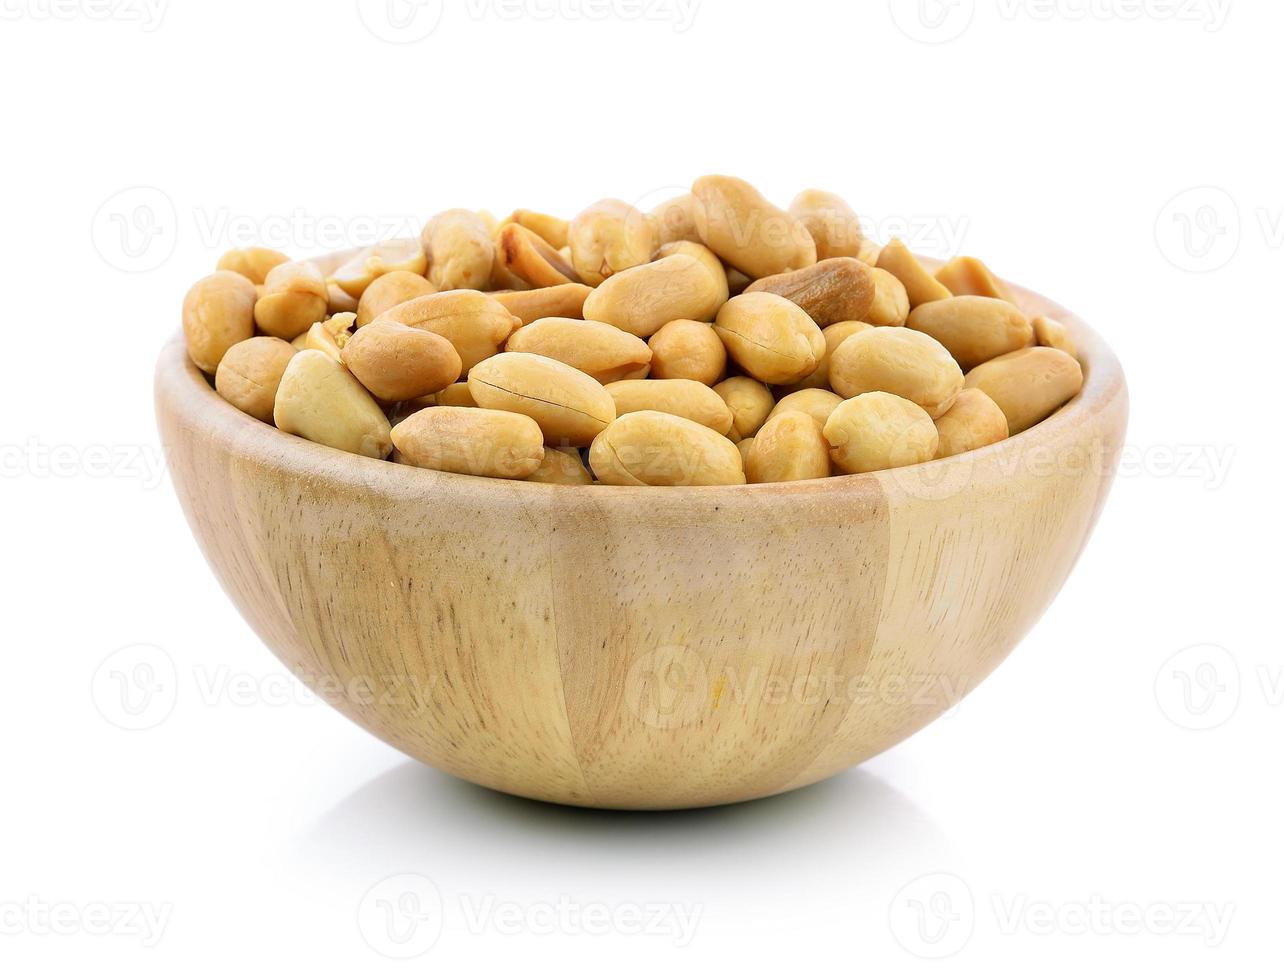 peanuts in a wood bowl on white background photo